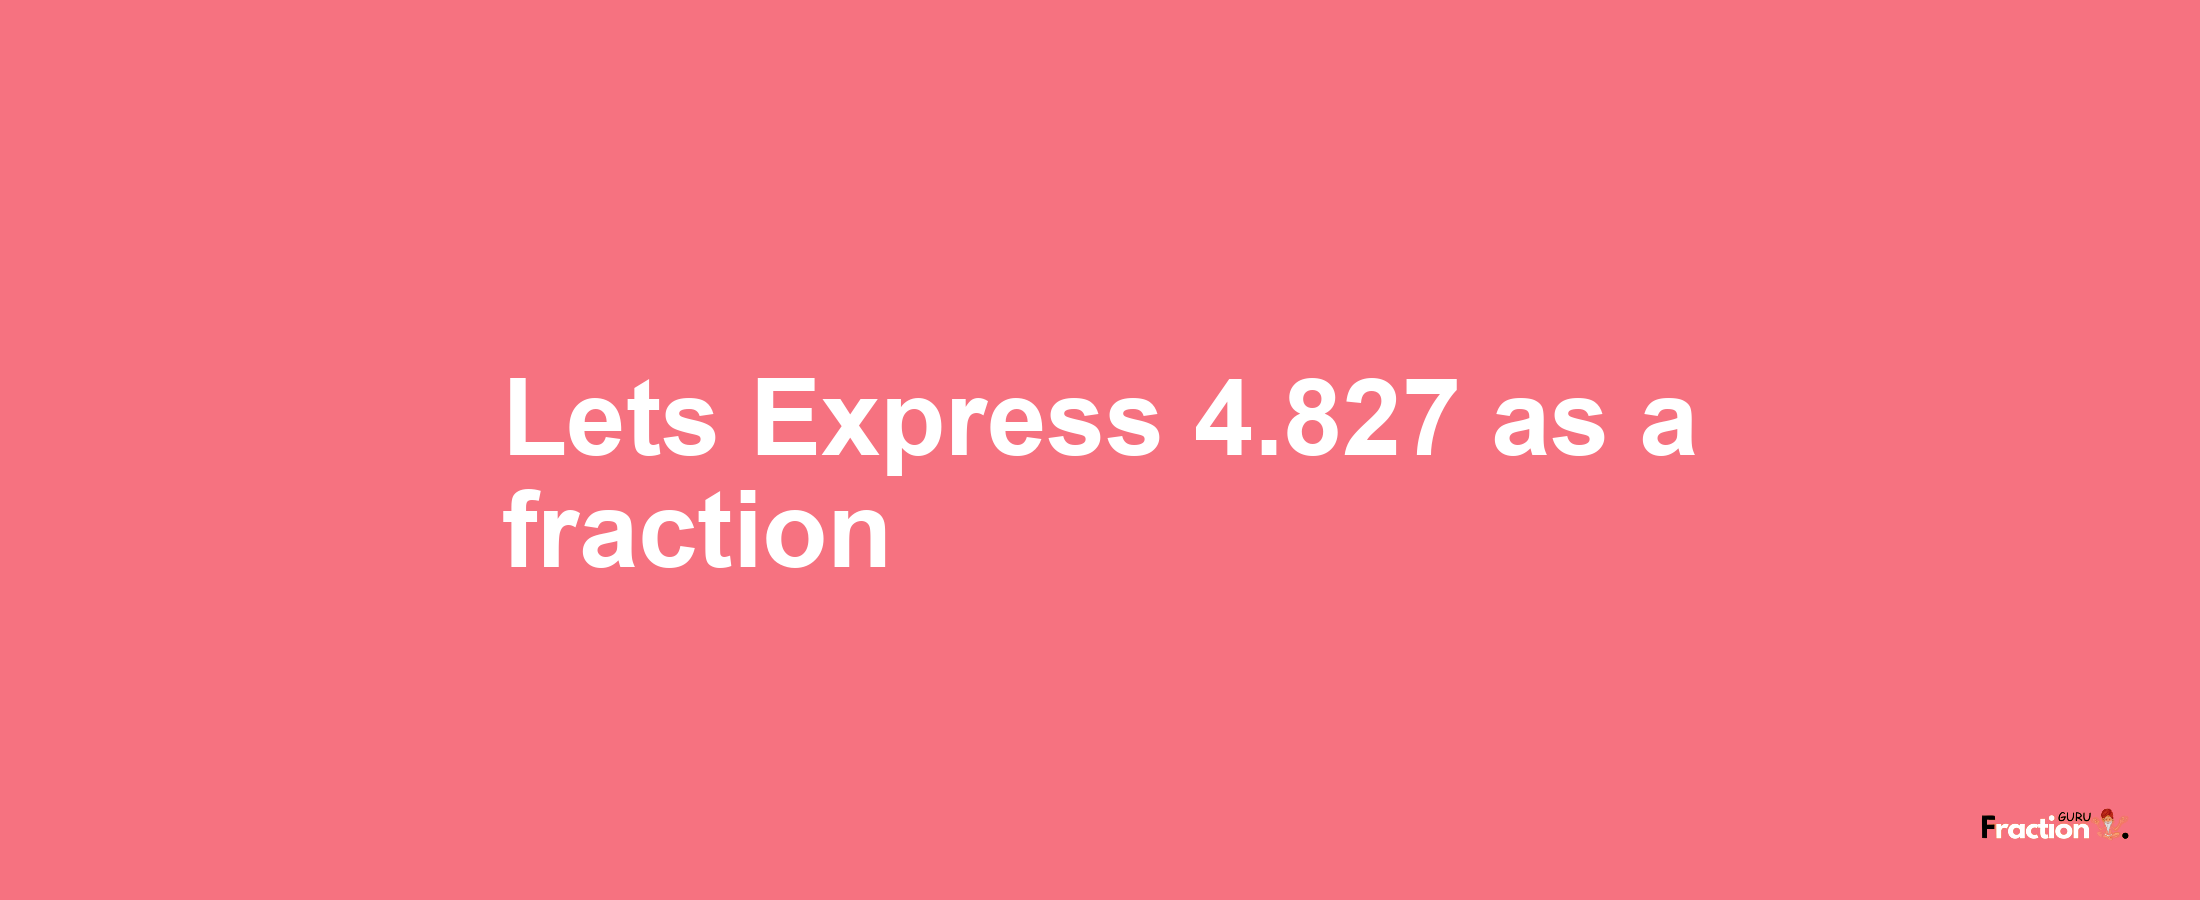 Lets Express 4.827 as afraction